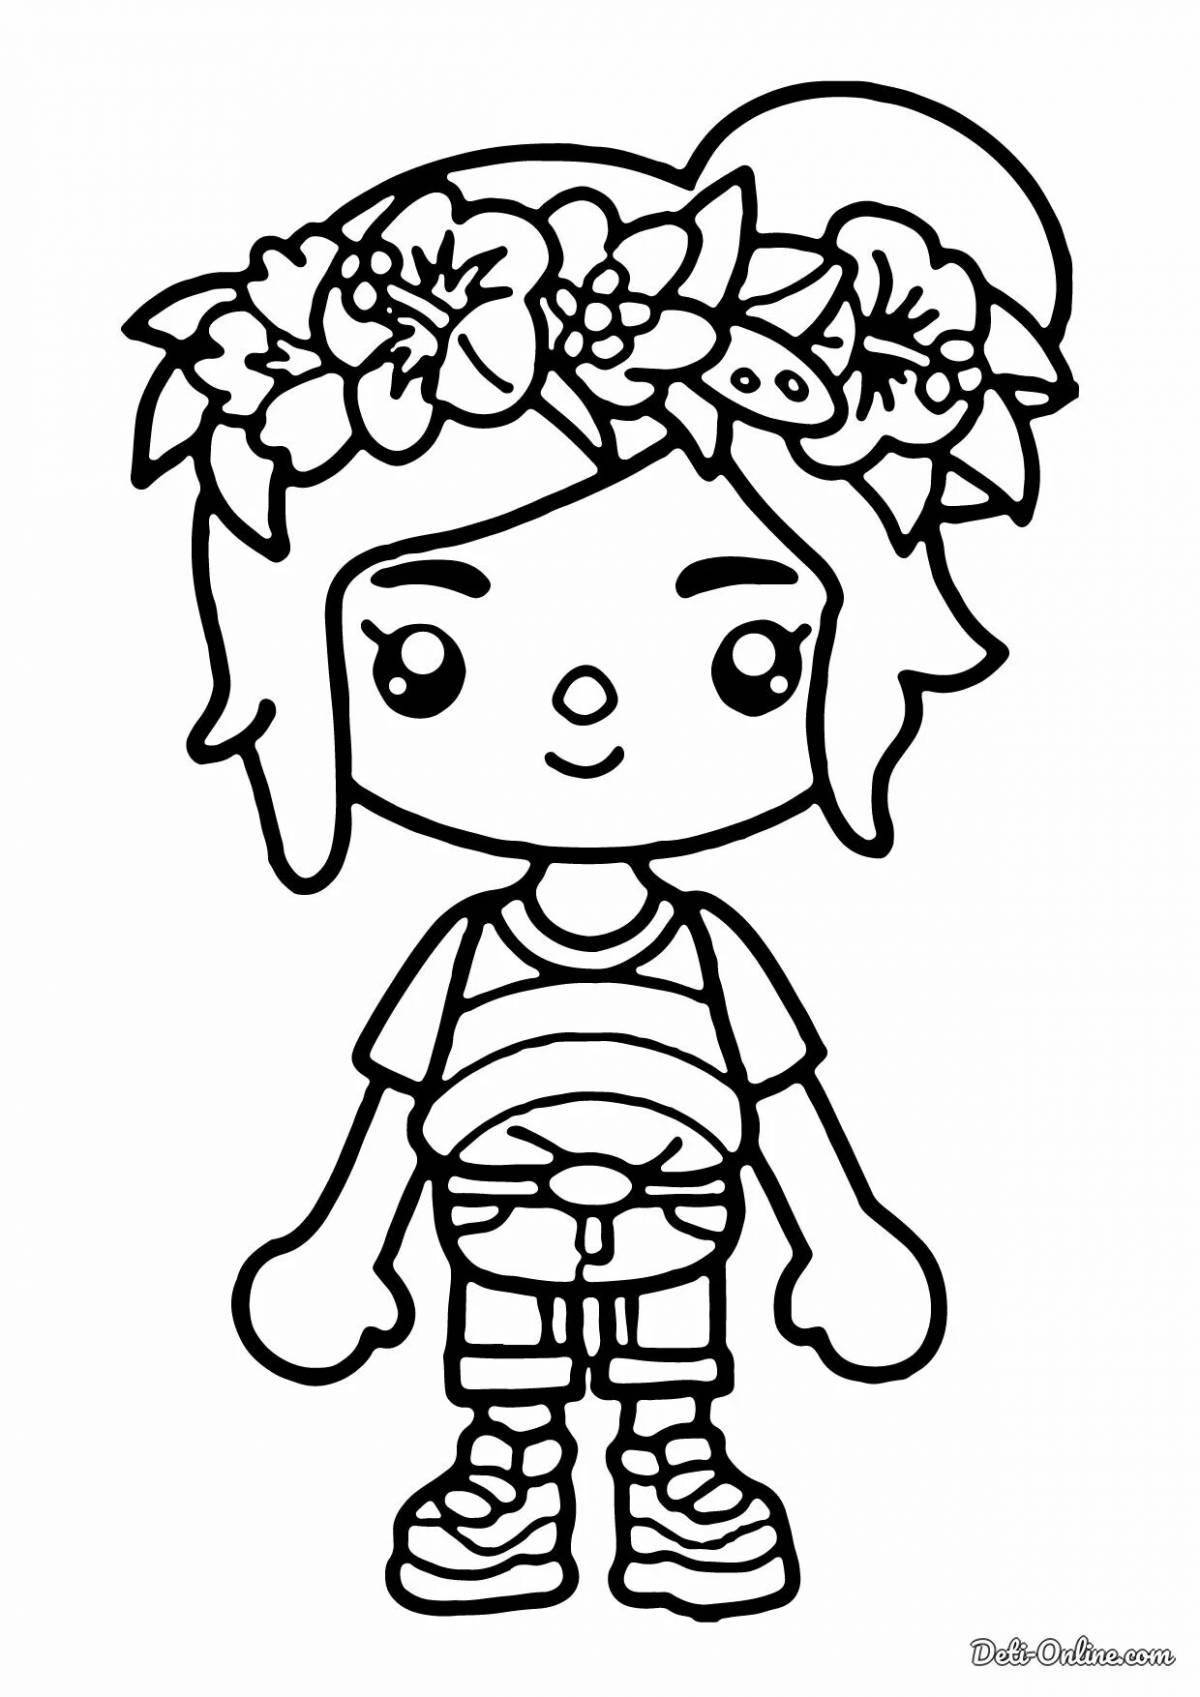 Colourful coloring pages for children